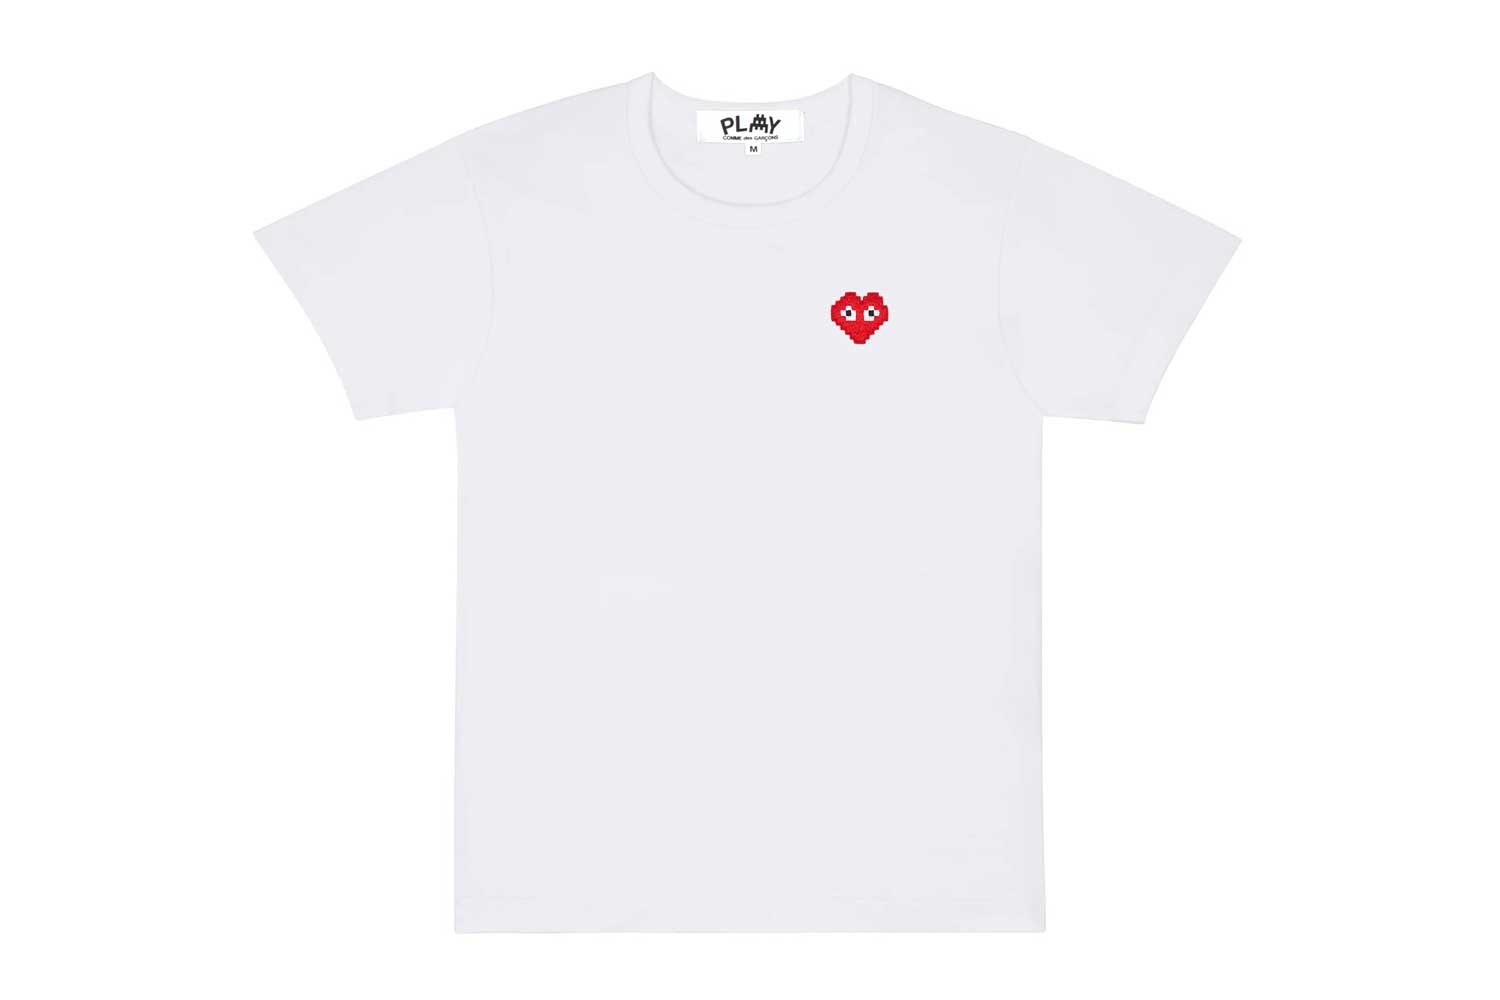 CDG Play's Invader Collab Includes Pixelized Heart Logo